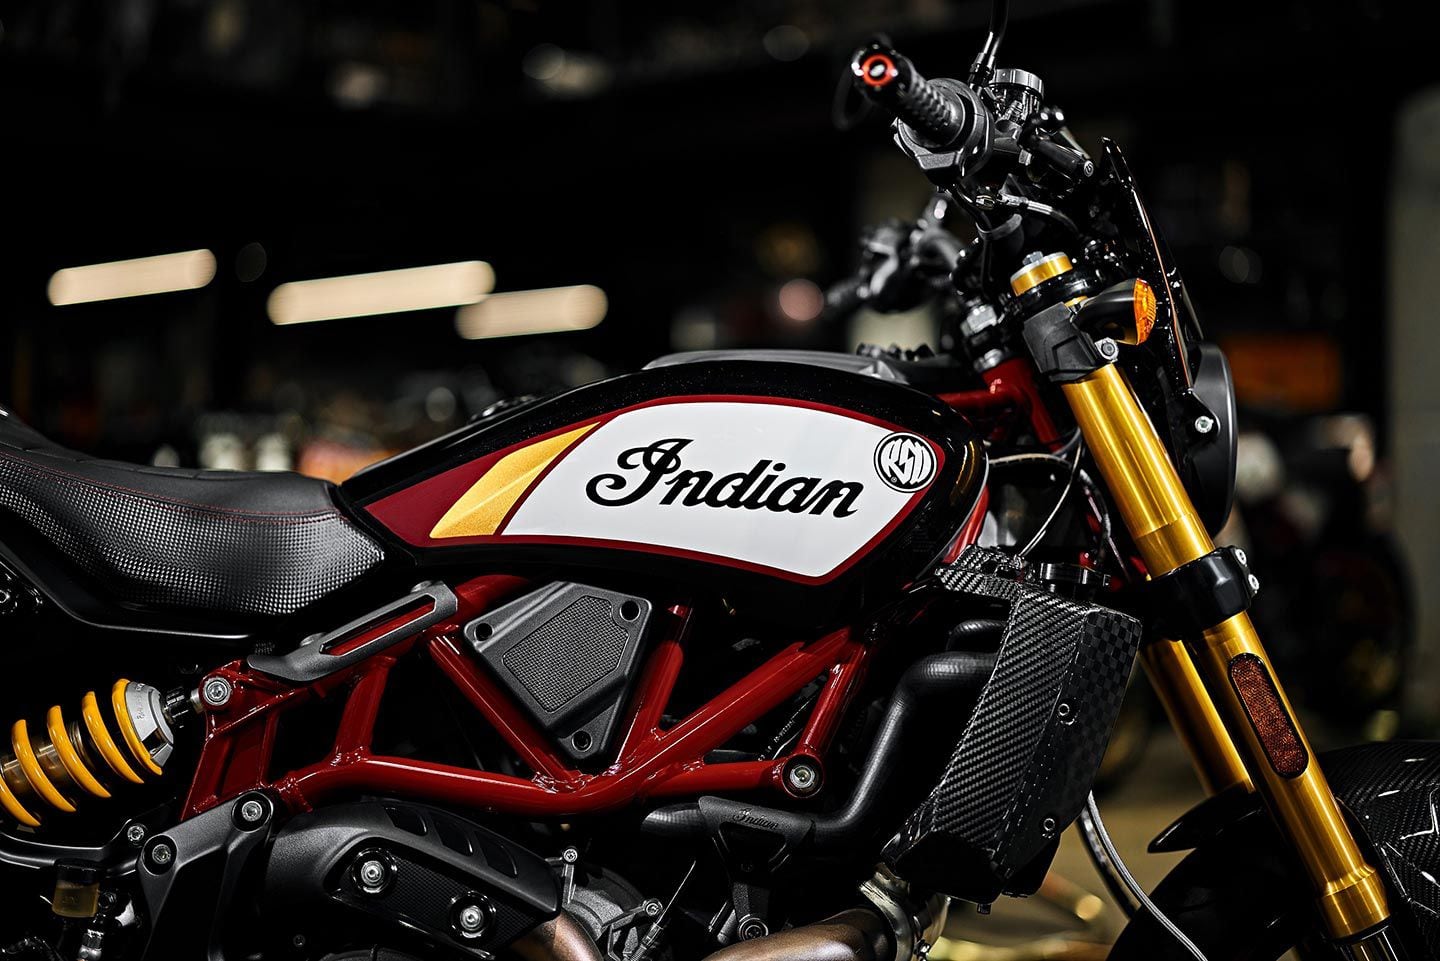 The FTR x RSD’s tank gets the Indian race team colors and is set off by carbon-fiber-ish accents.